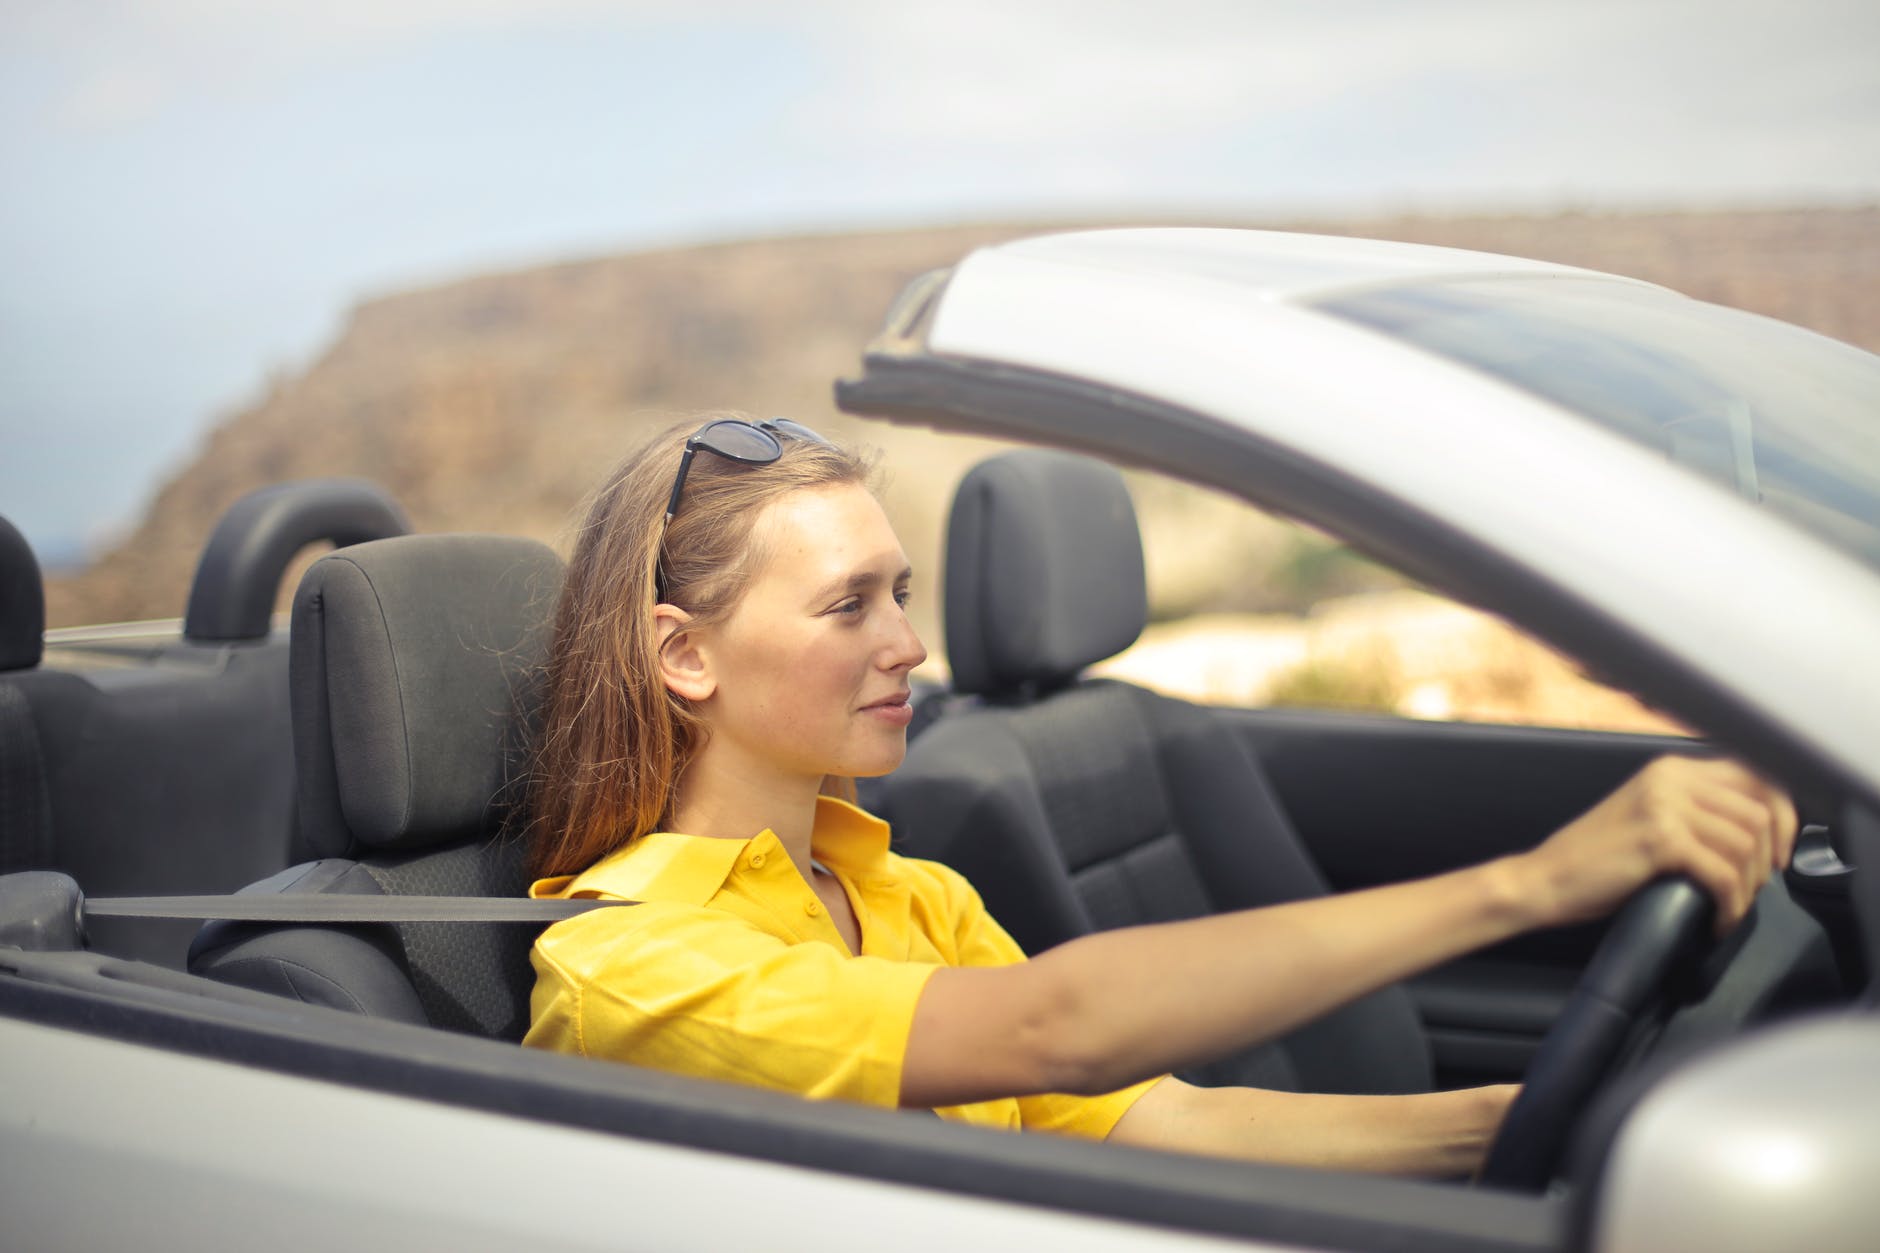 cheap car insurance for young drivers